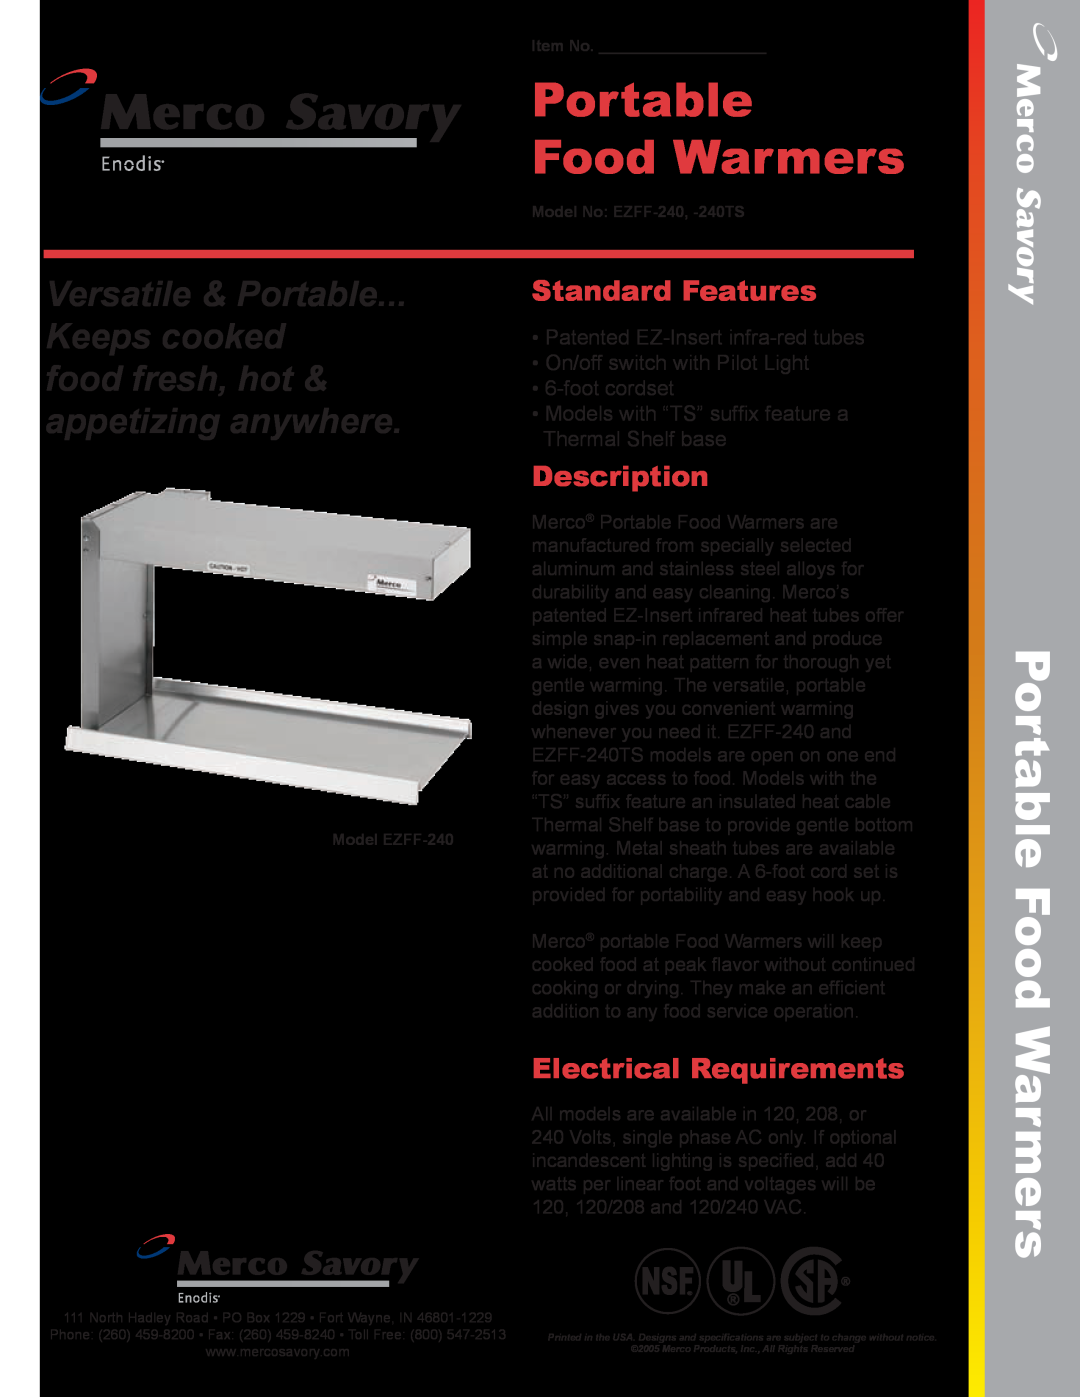 Merco Savory EZFF-240TS manual Portable Food Warmers, Standard Features, Description, Electrical Requirements 